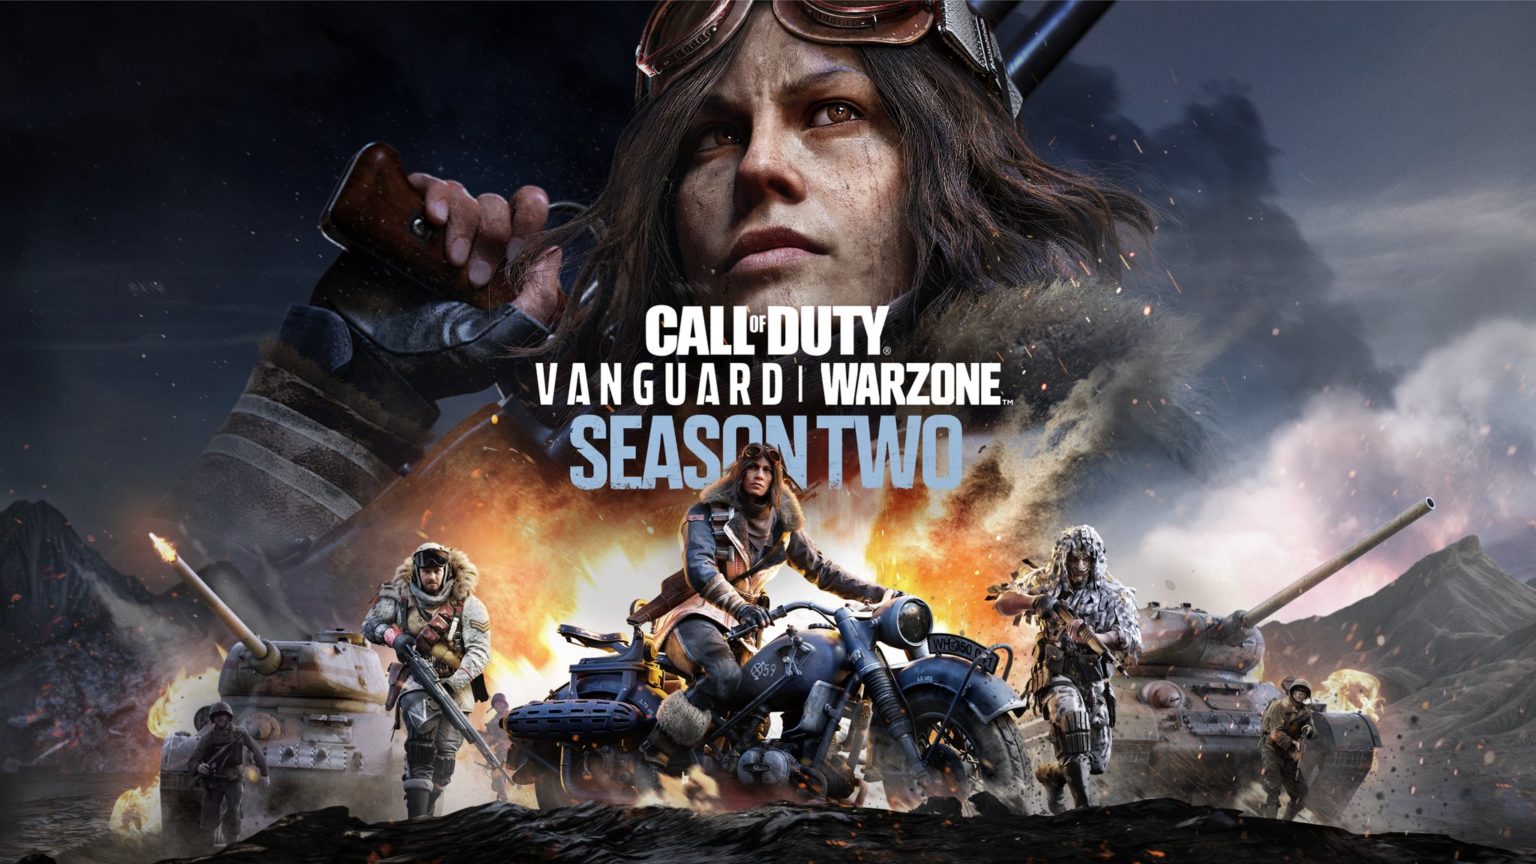 Call of Duty: Vanguard and Warzone Season 2 artwork leaked with PlayStation Network update!